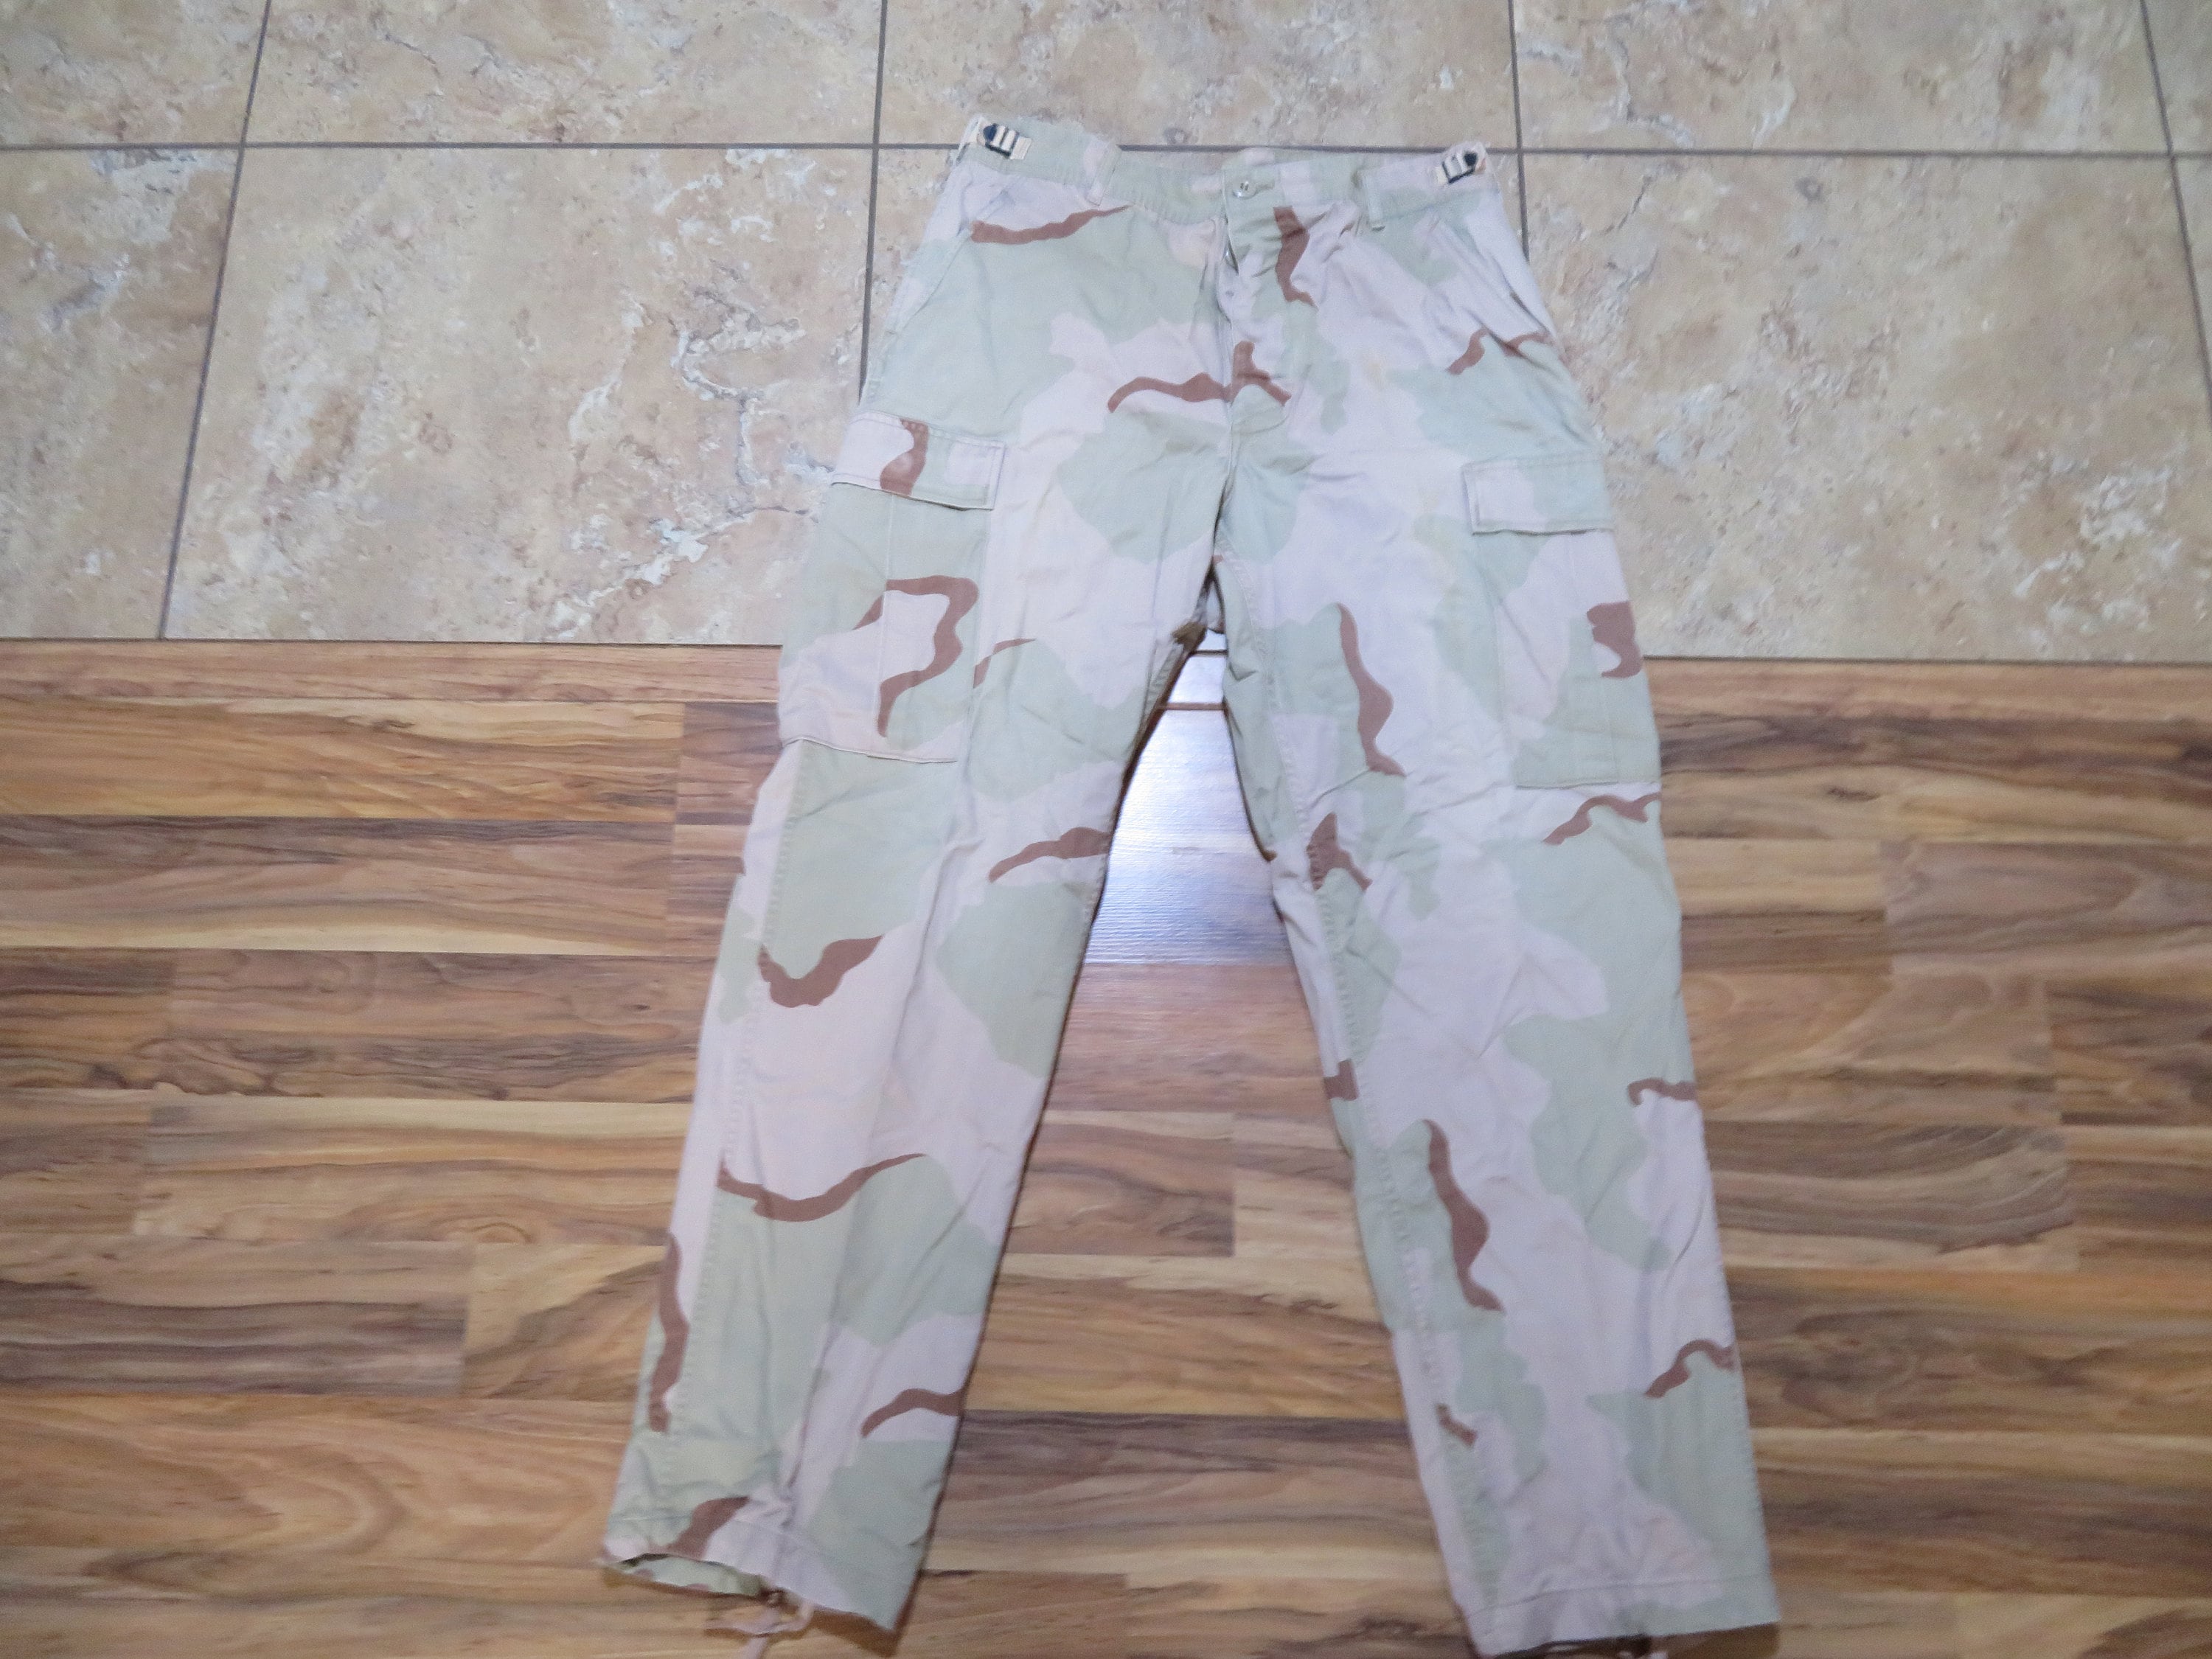 US Military Issue 3 Color Desert Tan/brown Camo Pants -  Israel